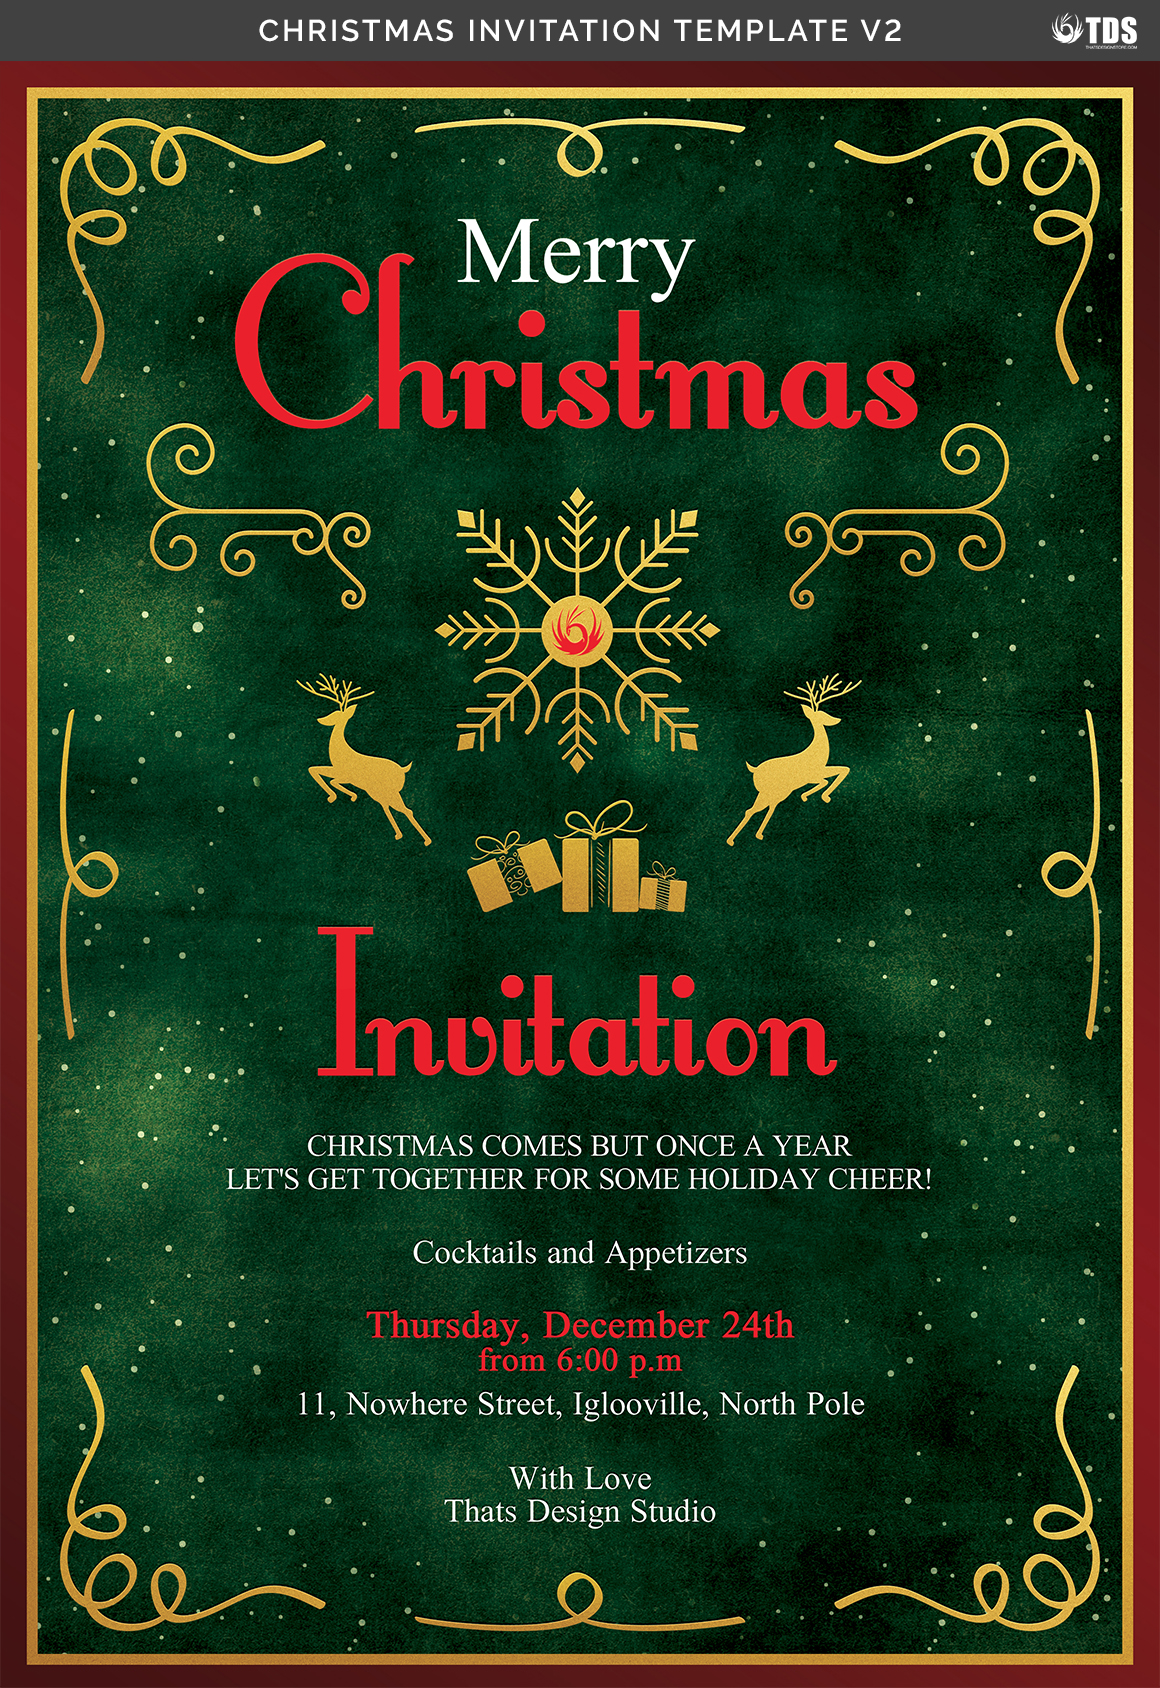 How To Make Your Christmas Invitation Sample Look Amazing In 13+ Days